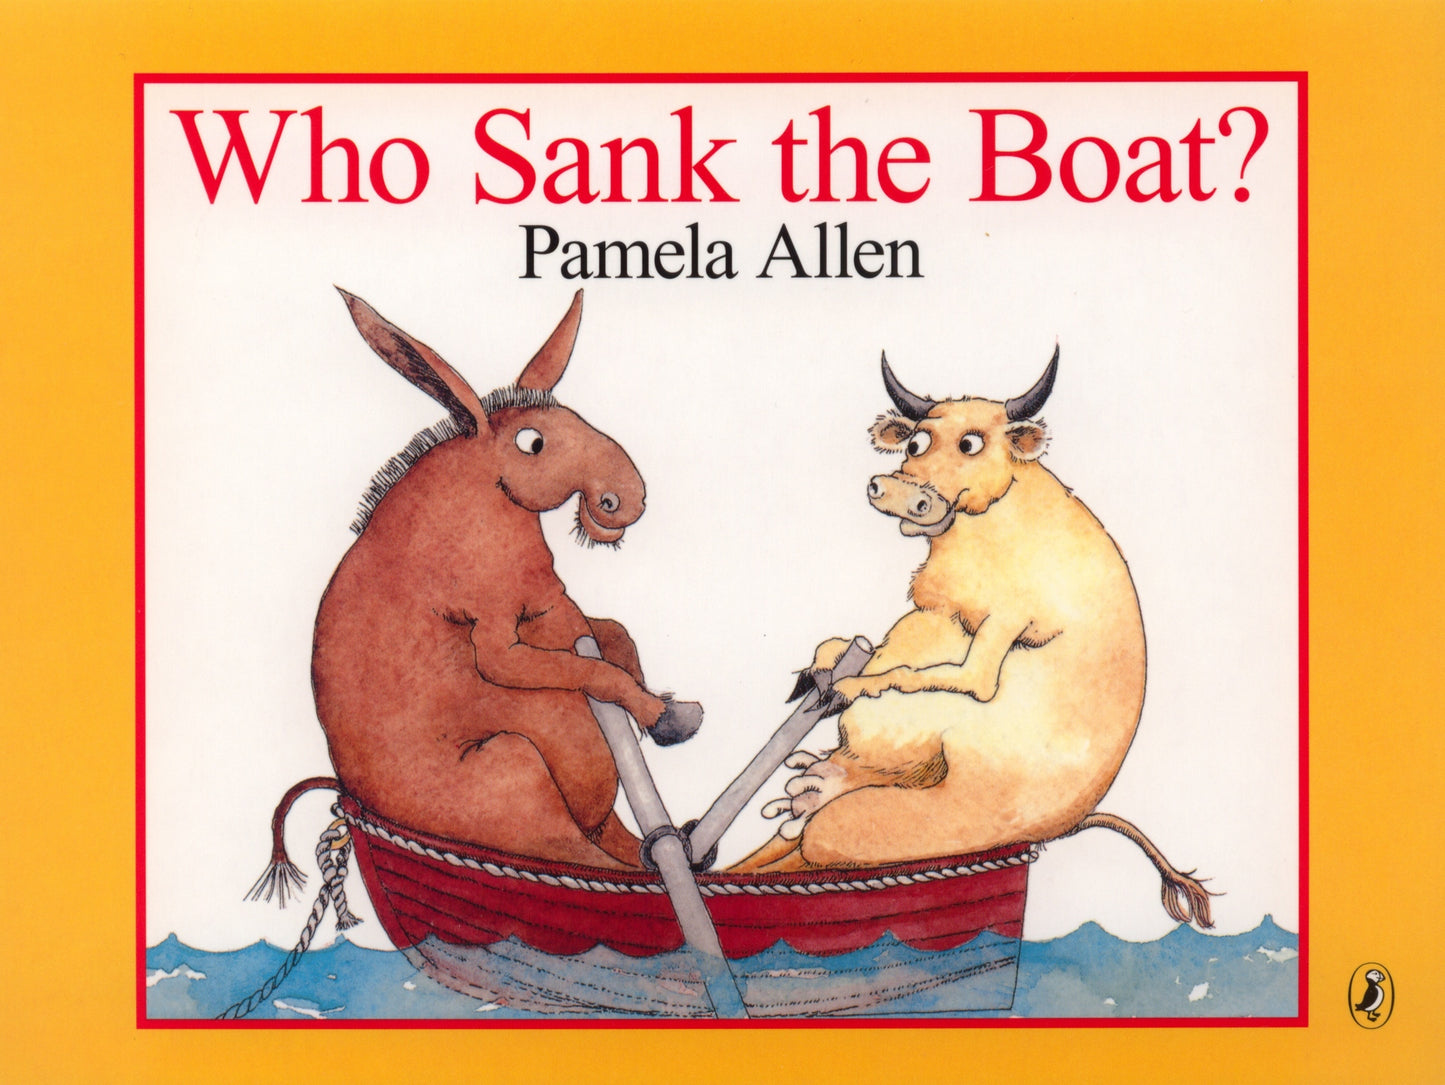 Who Sank the Boat